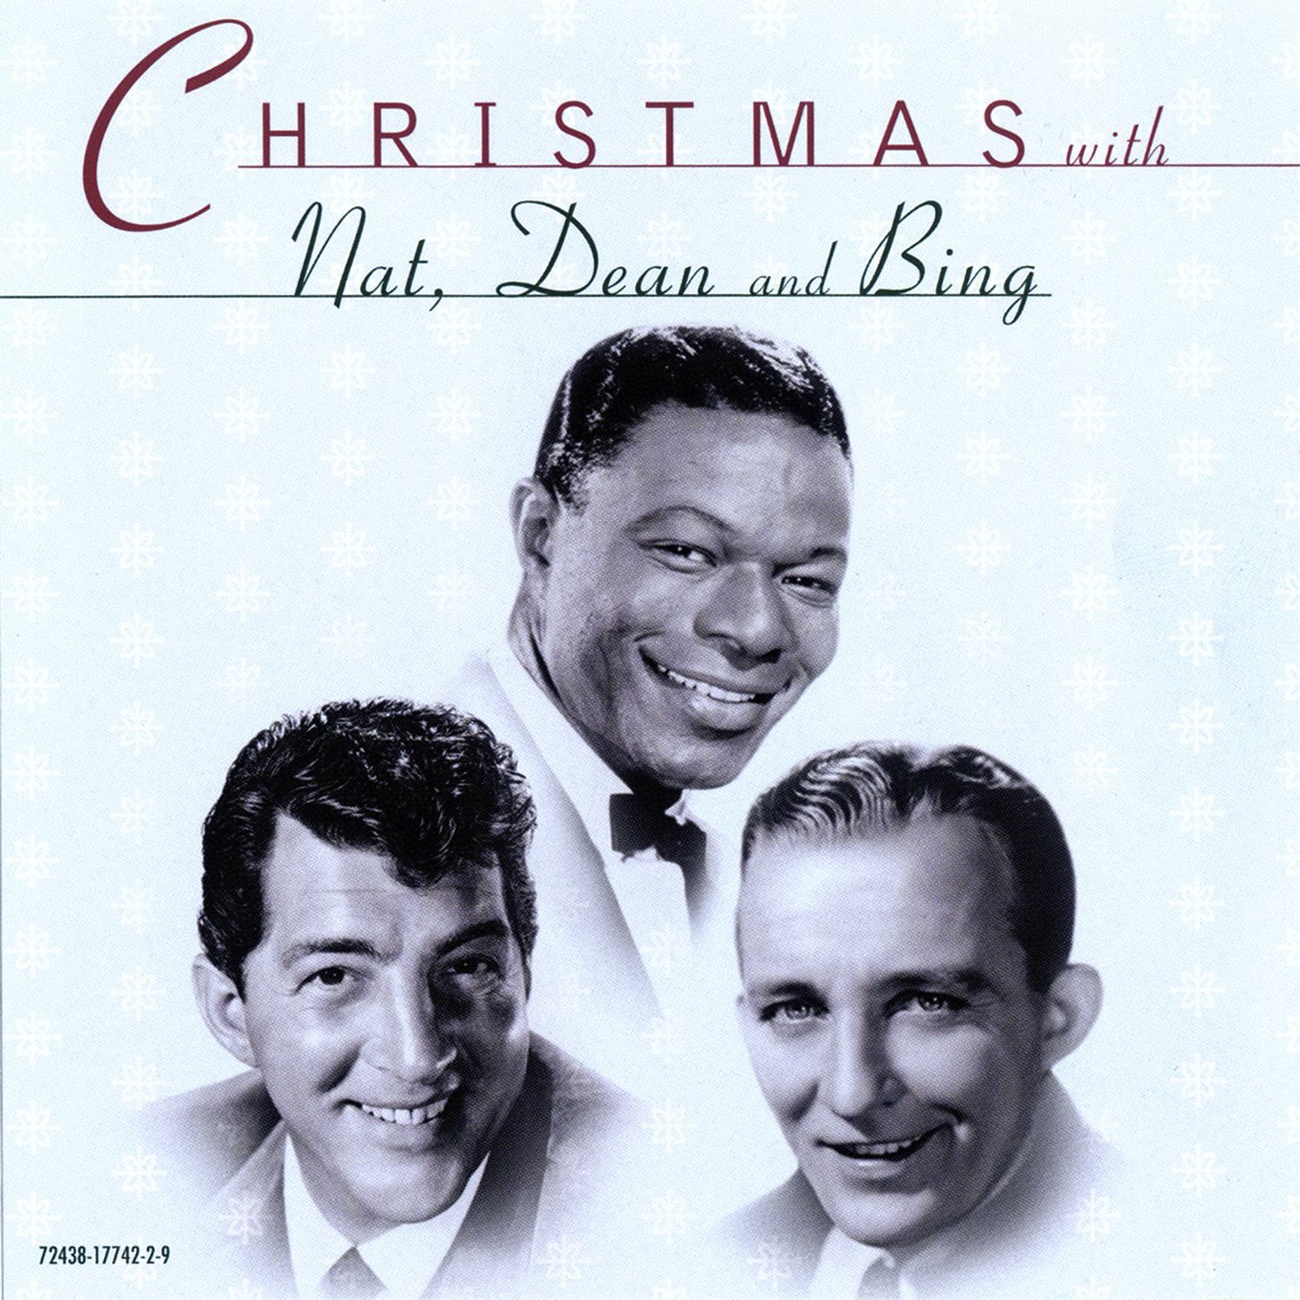 Christmas With Bing Crosby / Nat King Cole / Dean Martin